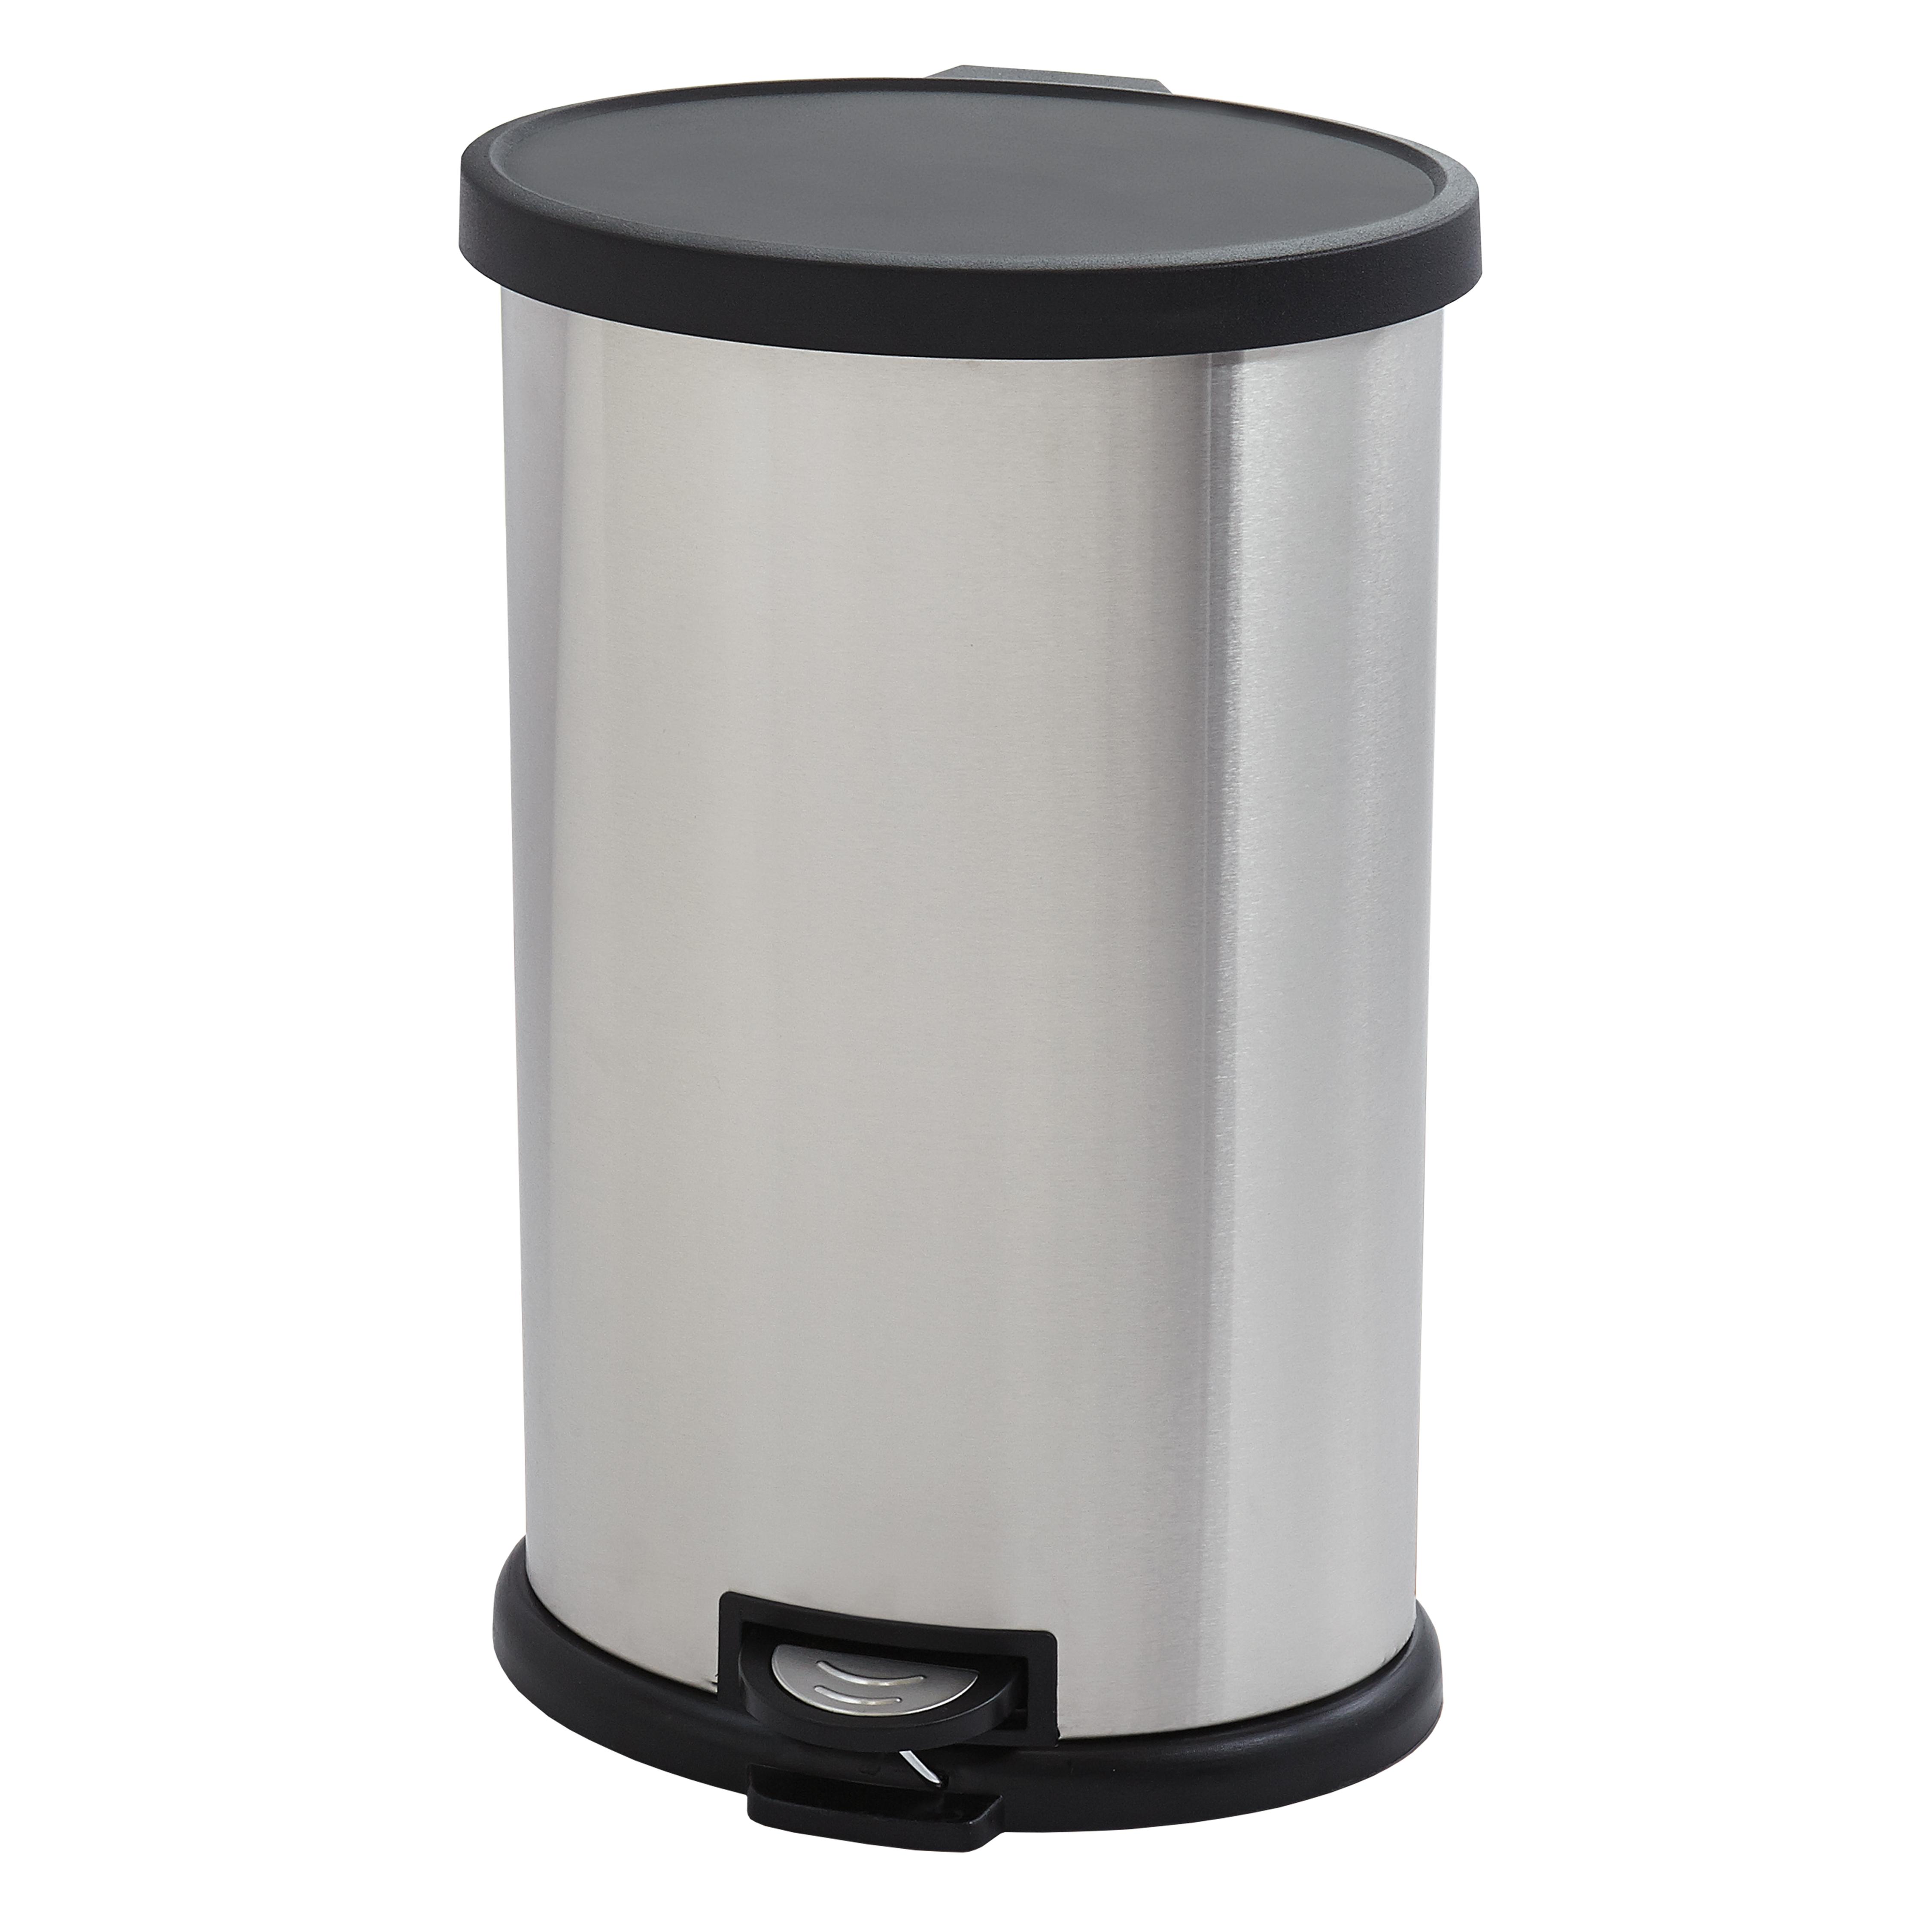 Mainstays 3-Piece Stainless Steel 1.3 and 8 gal Kitchen Garbage Can Combo - image 2 of 7